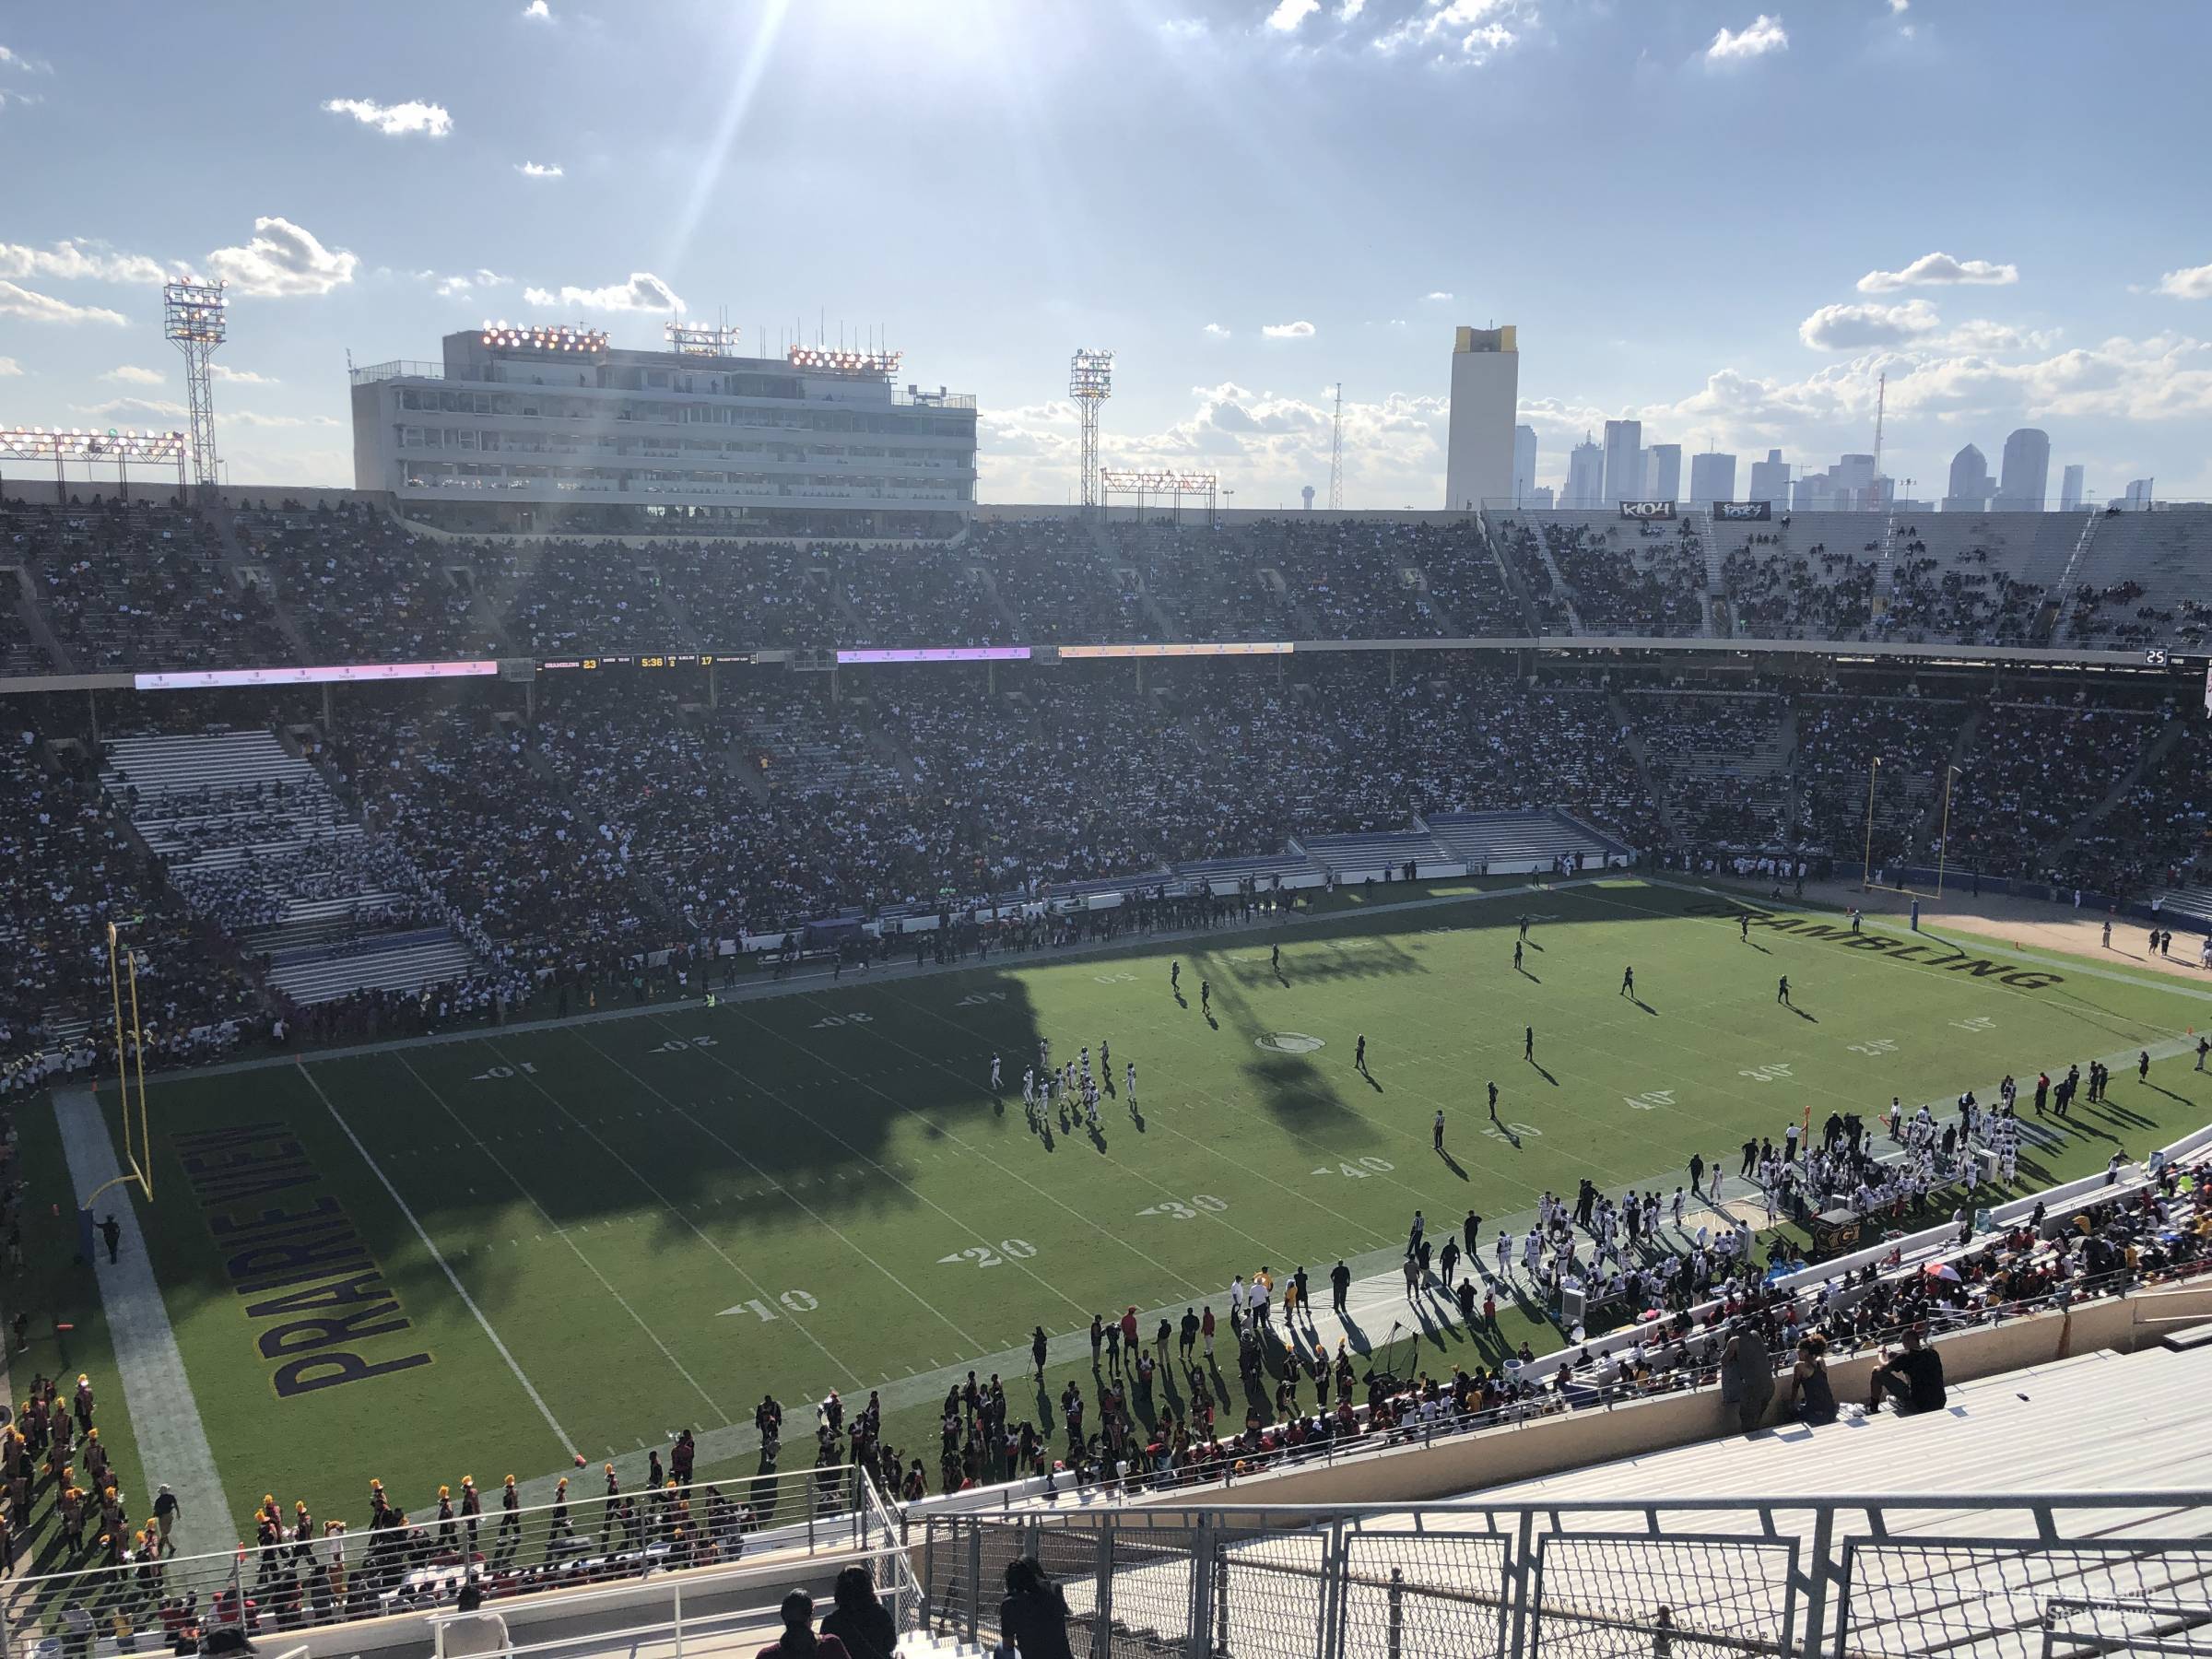 section 132, row 22 seat view  - cotton bowl